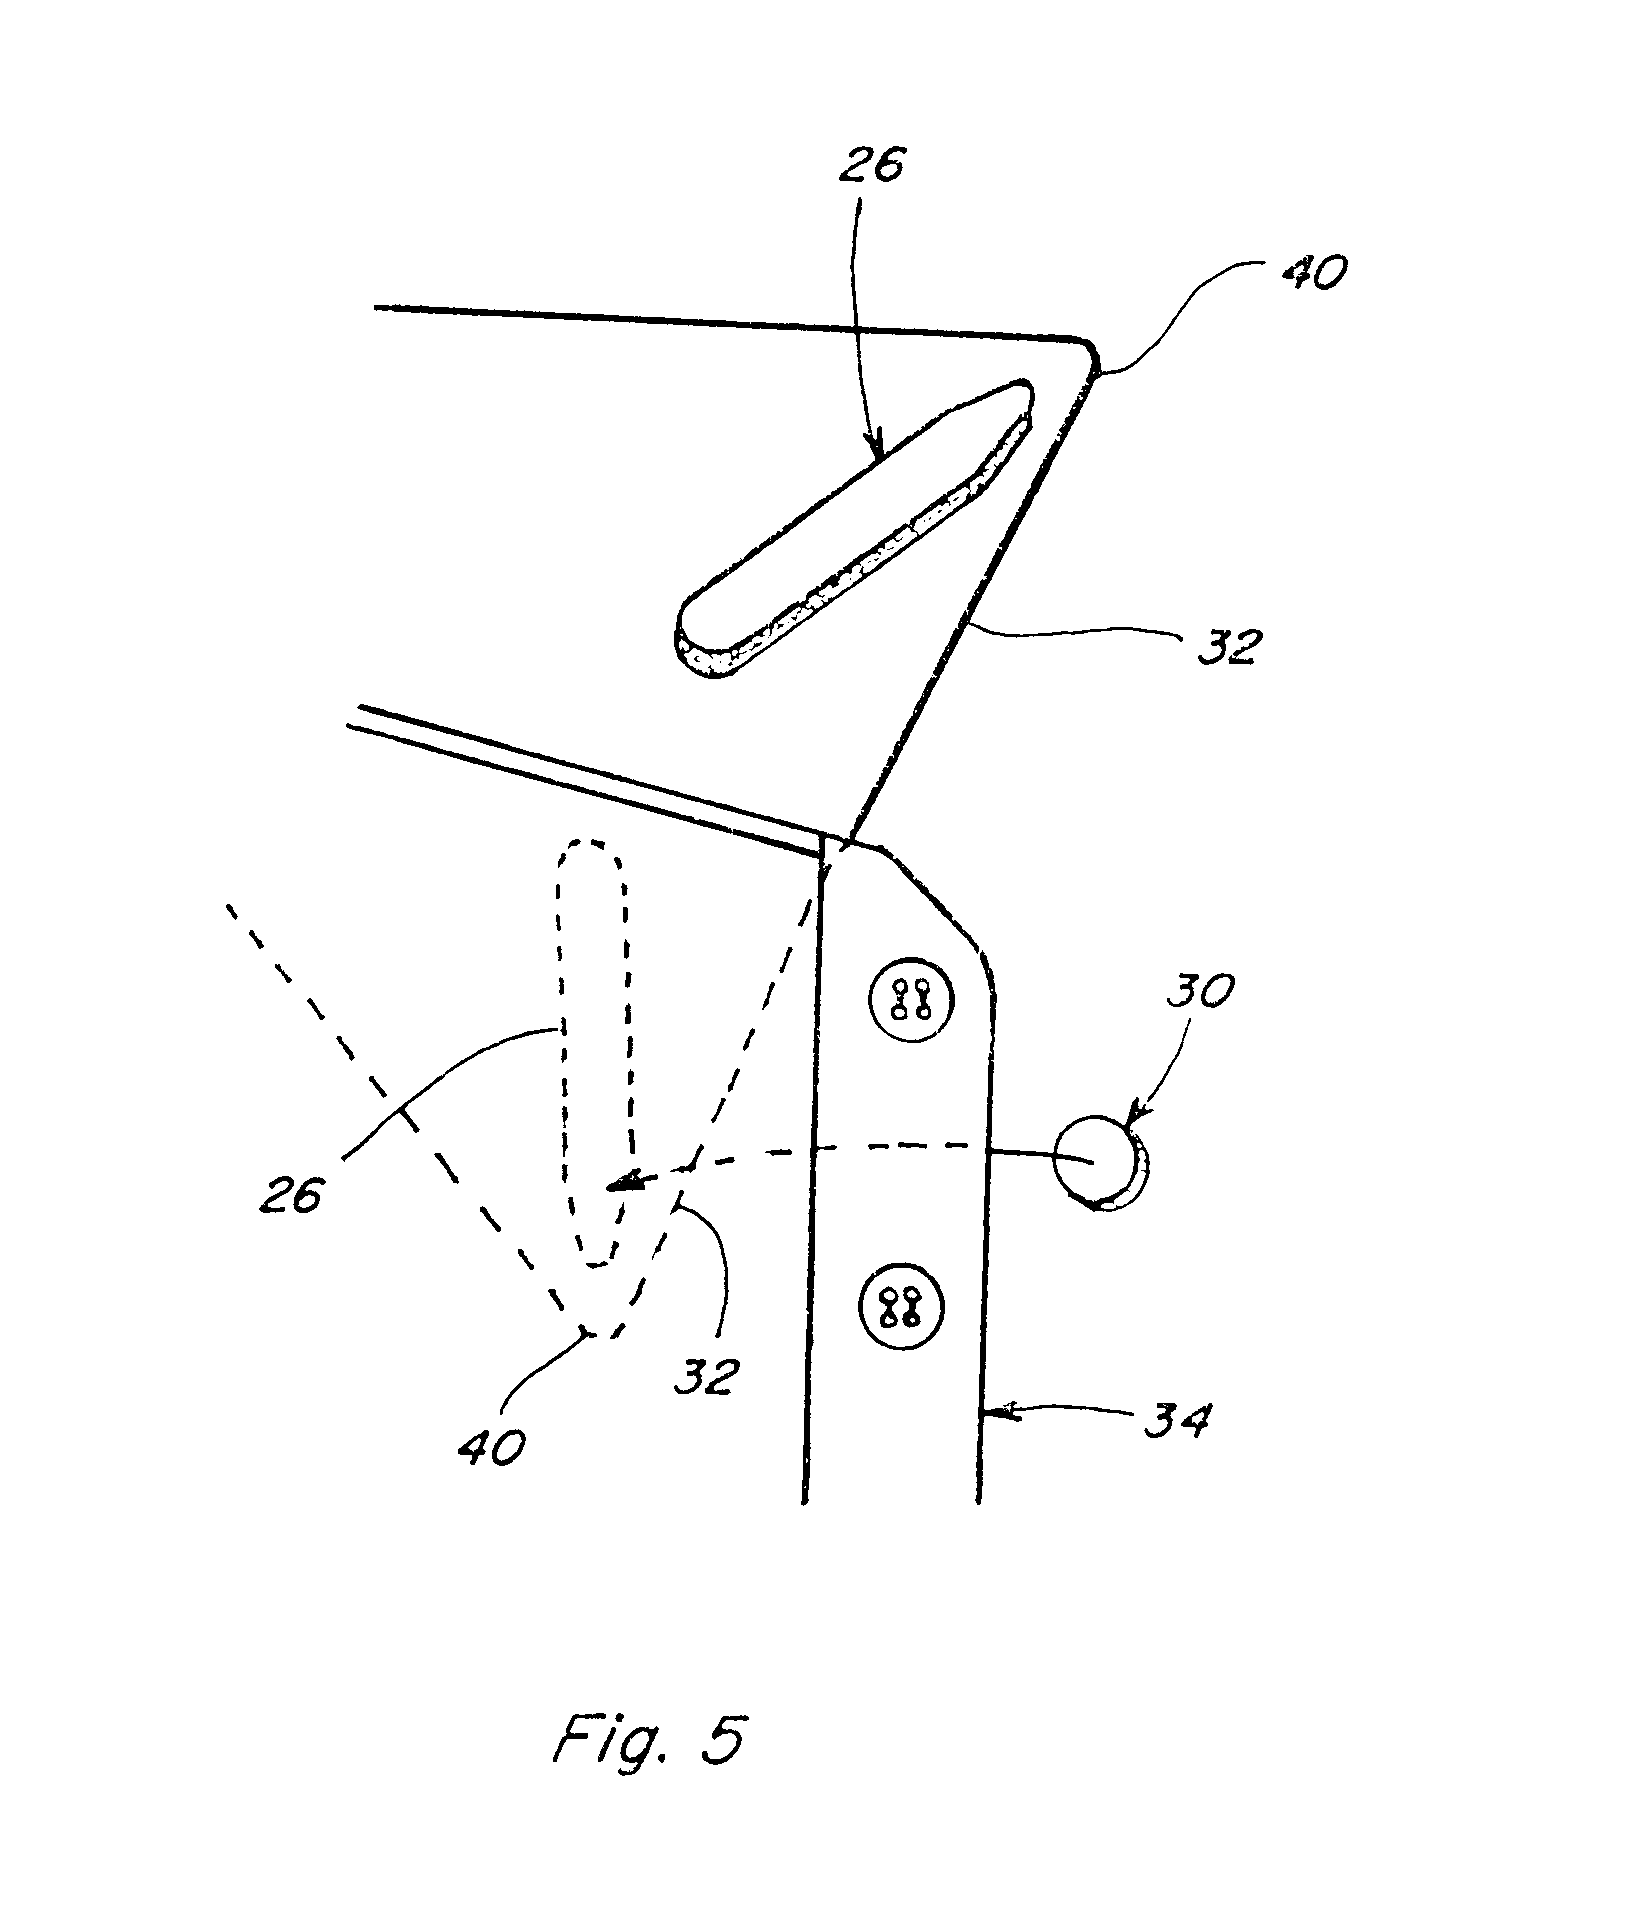 Apparatus for keeping a shirt collar aligned and fastened, magnetically